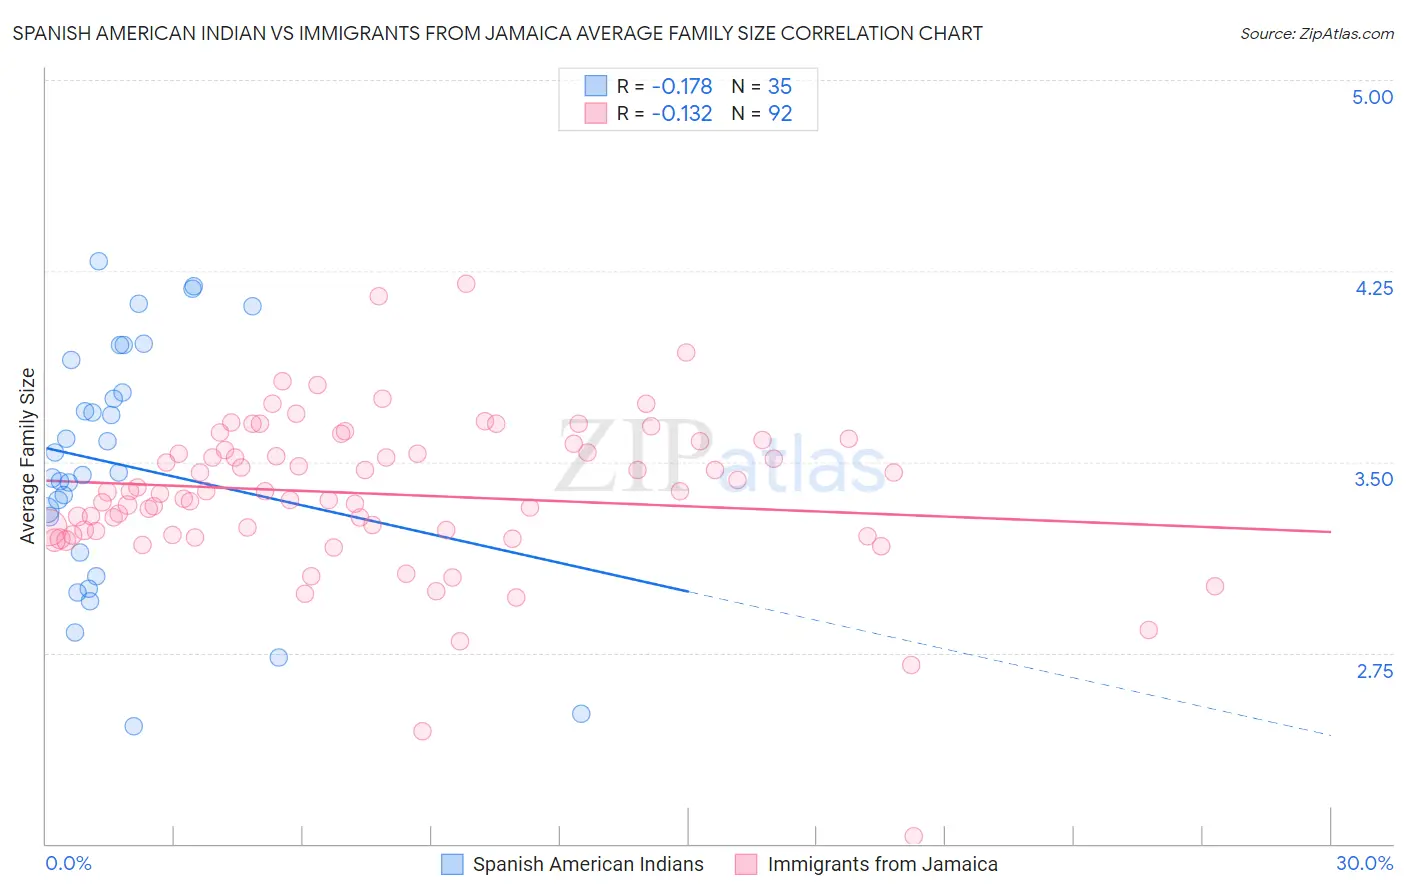 Spanish American Indian vs Immigrants from Jamaica Average Family Size